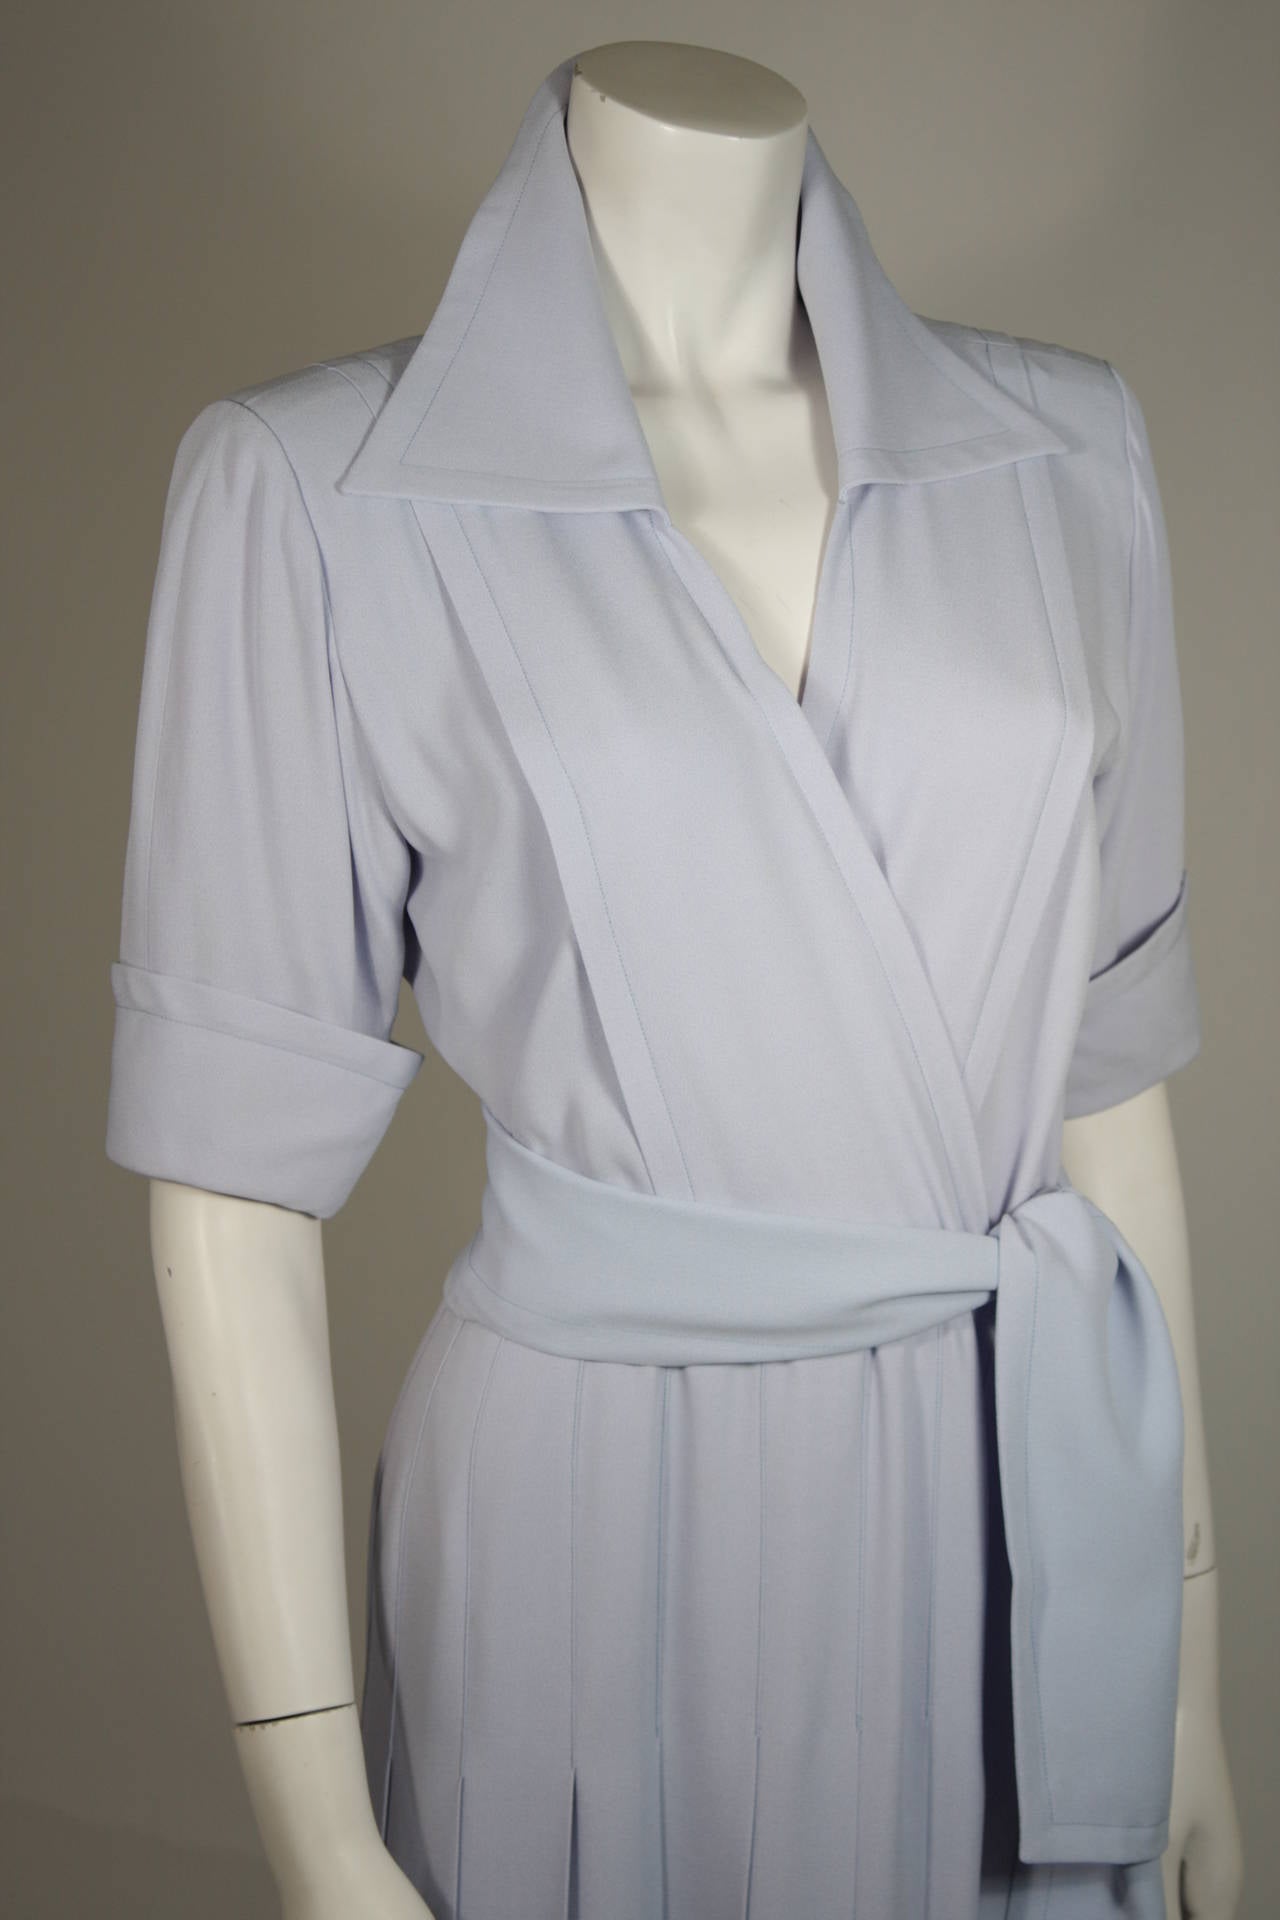 Saint Laurent Periwinkle Belted Shirt Dress Size In Excellent Condition For Sale In Los Angeles, CA